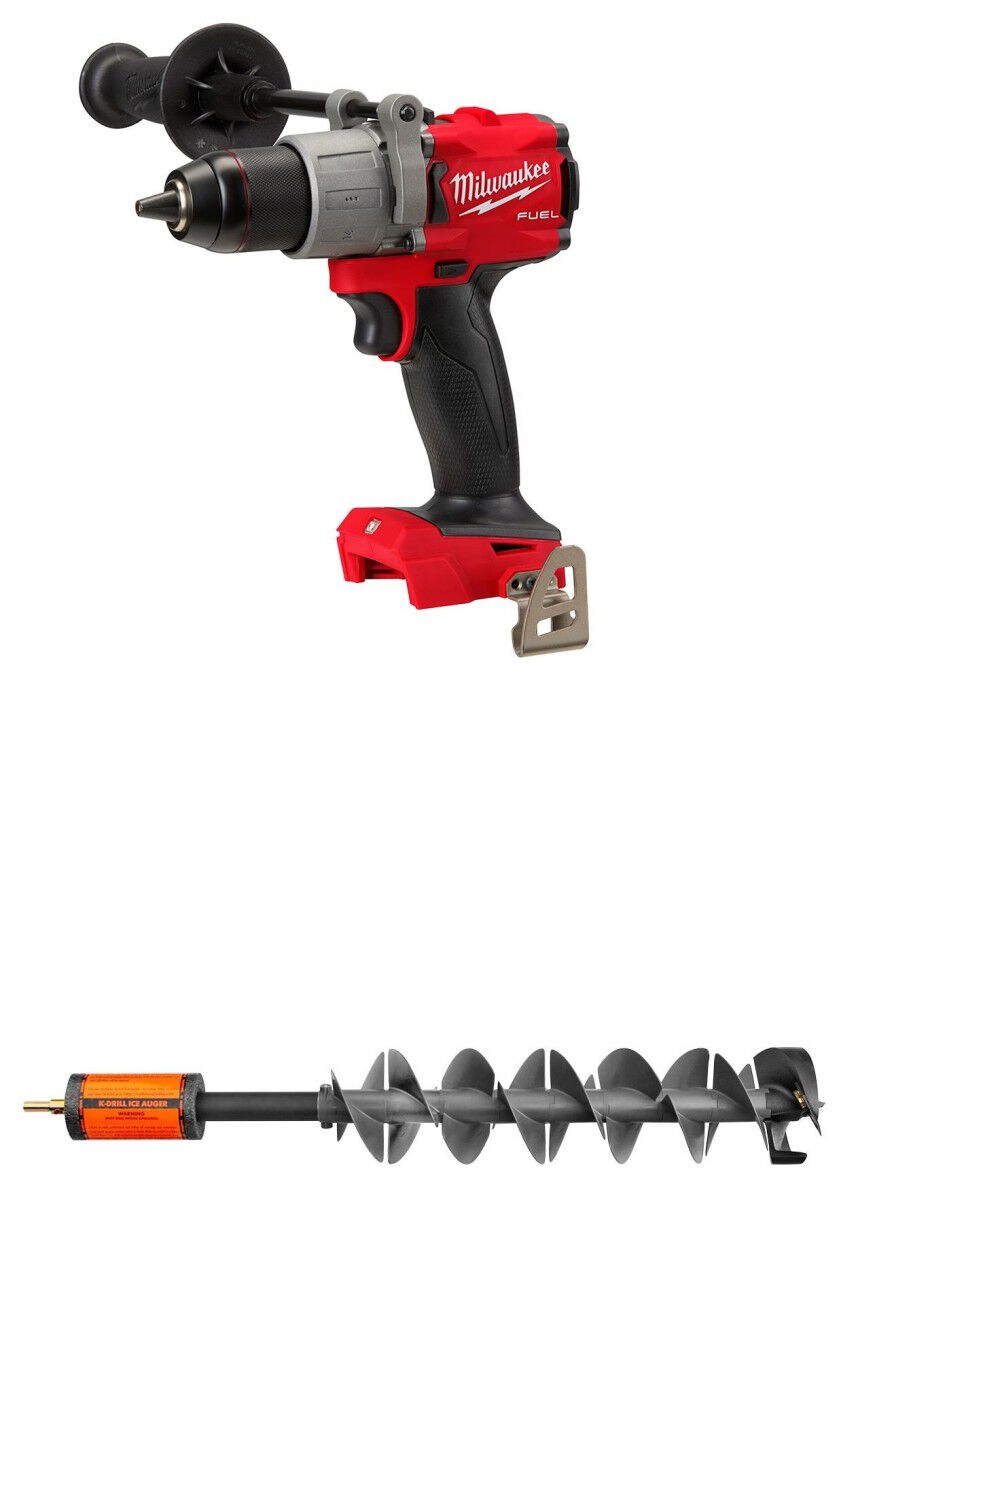 K-Drill Ice Auger With Milwaukee M18 FUEL 1/2in Drill Driver (Bare Tool)  Reconditioned, Cordless Drill Ice Auger Reviews